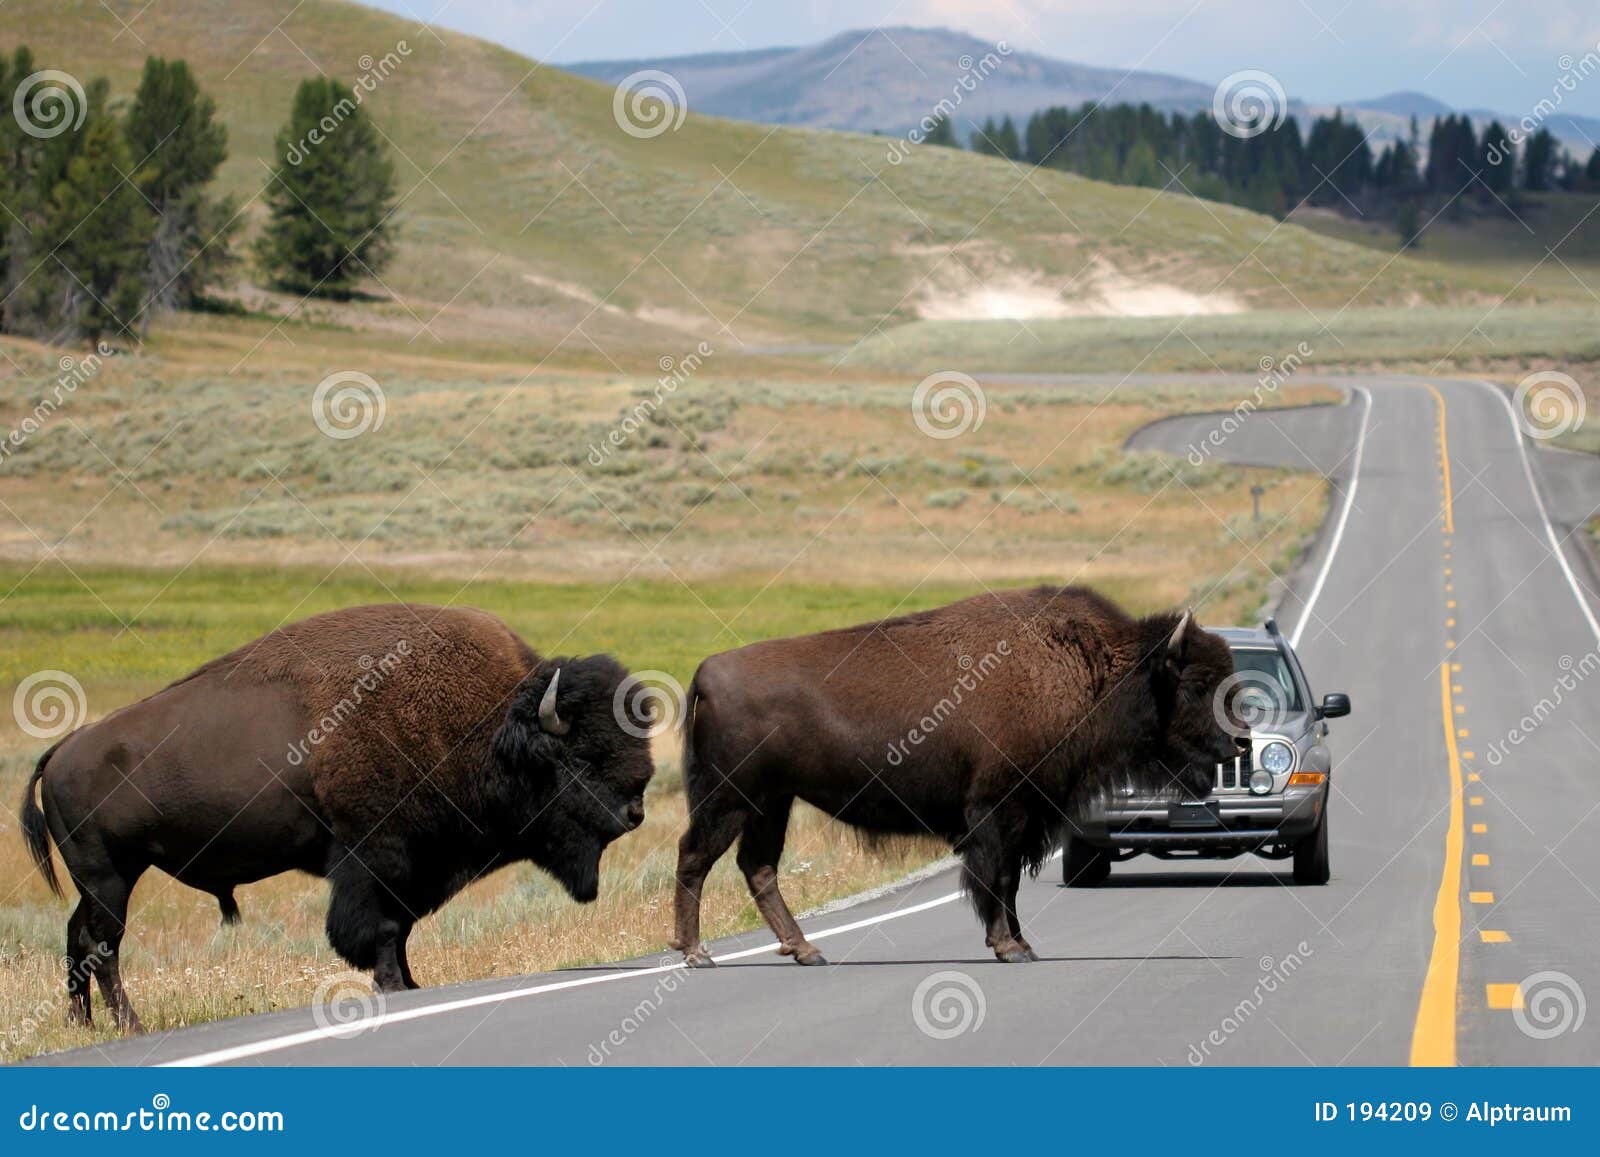 bison crossing the road in yellowstone